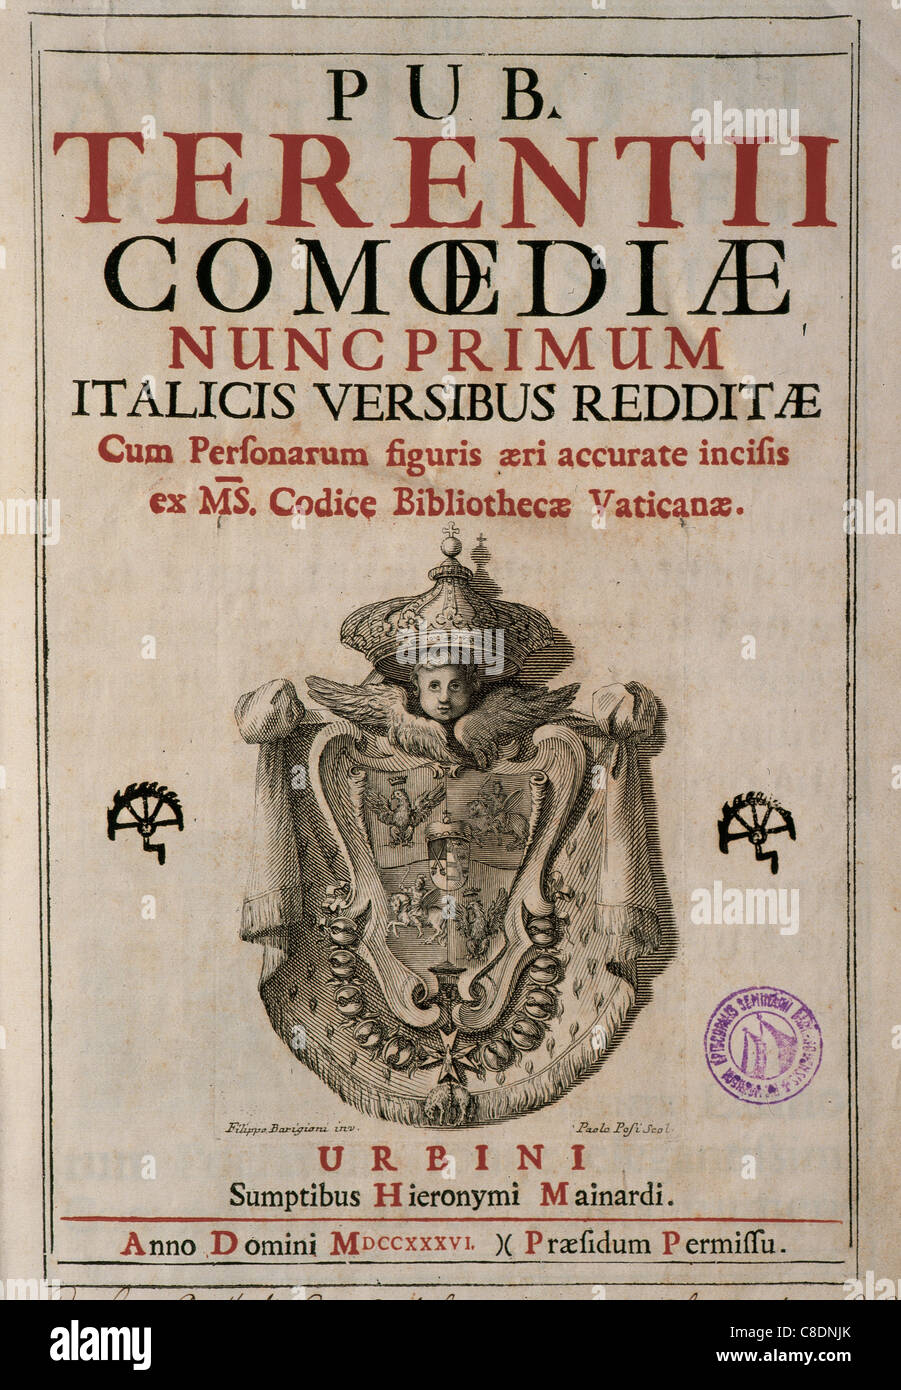 Terence (195-159 BC). Latin comic writer. Title cover of his comedies. Codex of the Vatican Library. 1736. Stock Photo